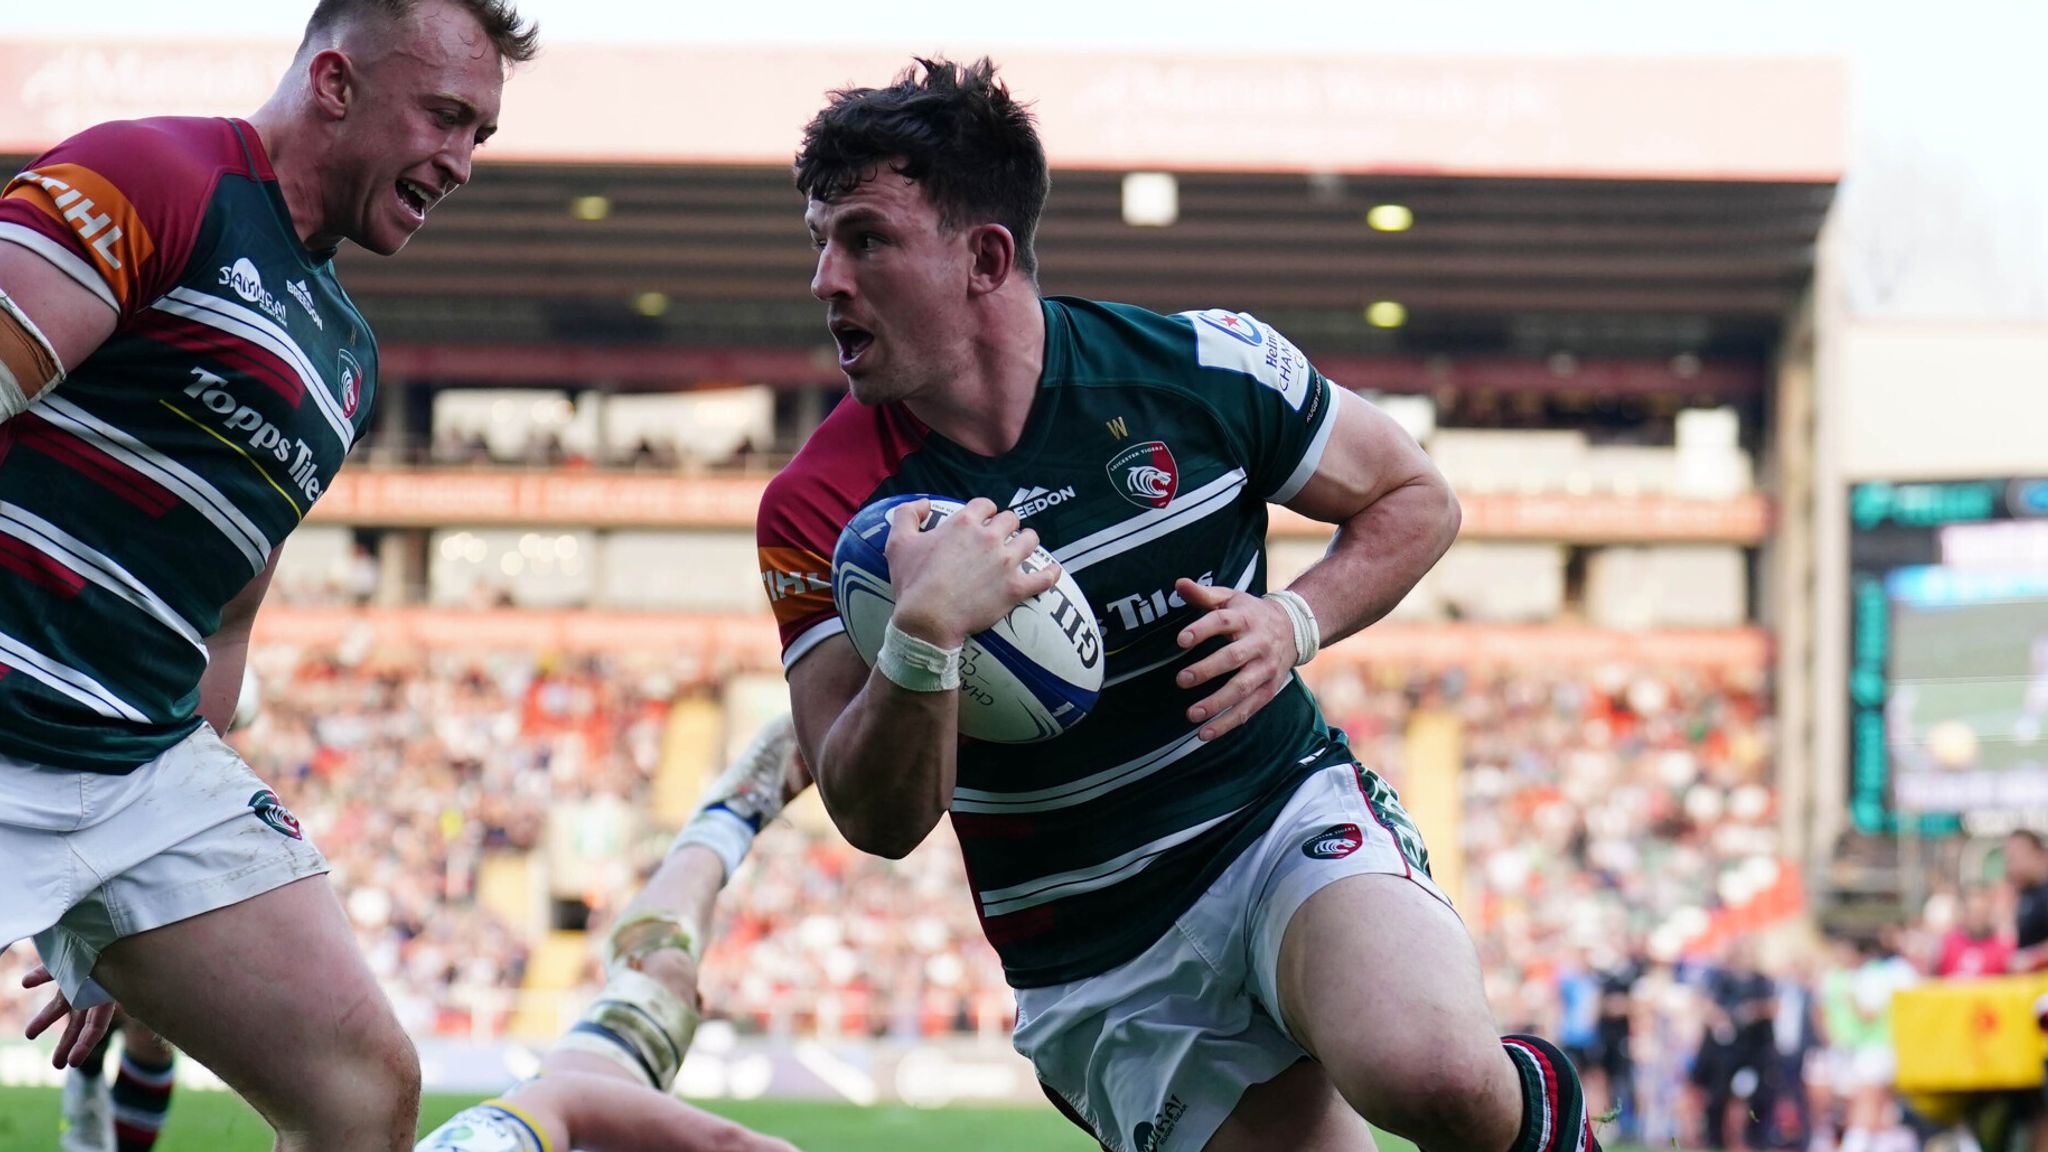 Heineken Champions Cup Leicester Tigers 27-17 (56-27) Clermont Auvergne; Ulster 23-30 (49-50) Toulouse Rugby Union News Sky Sports